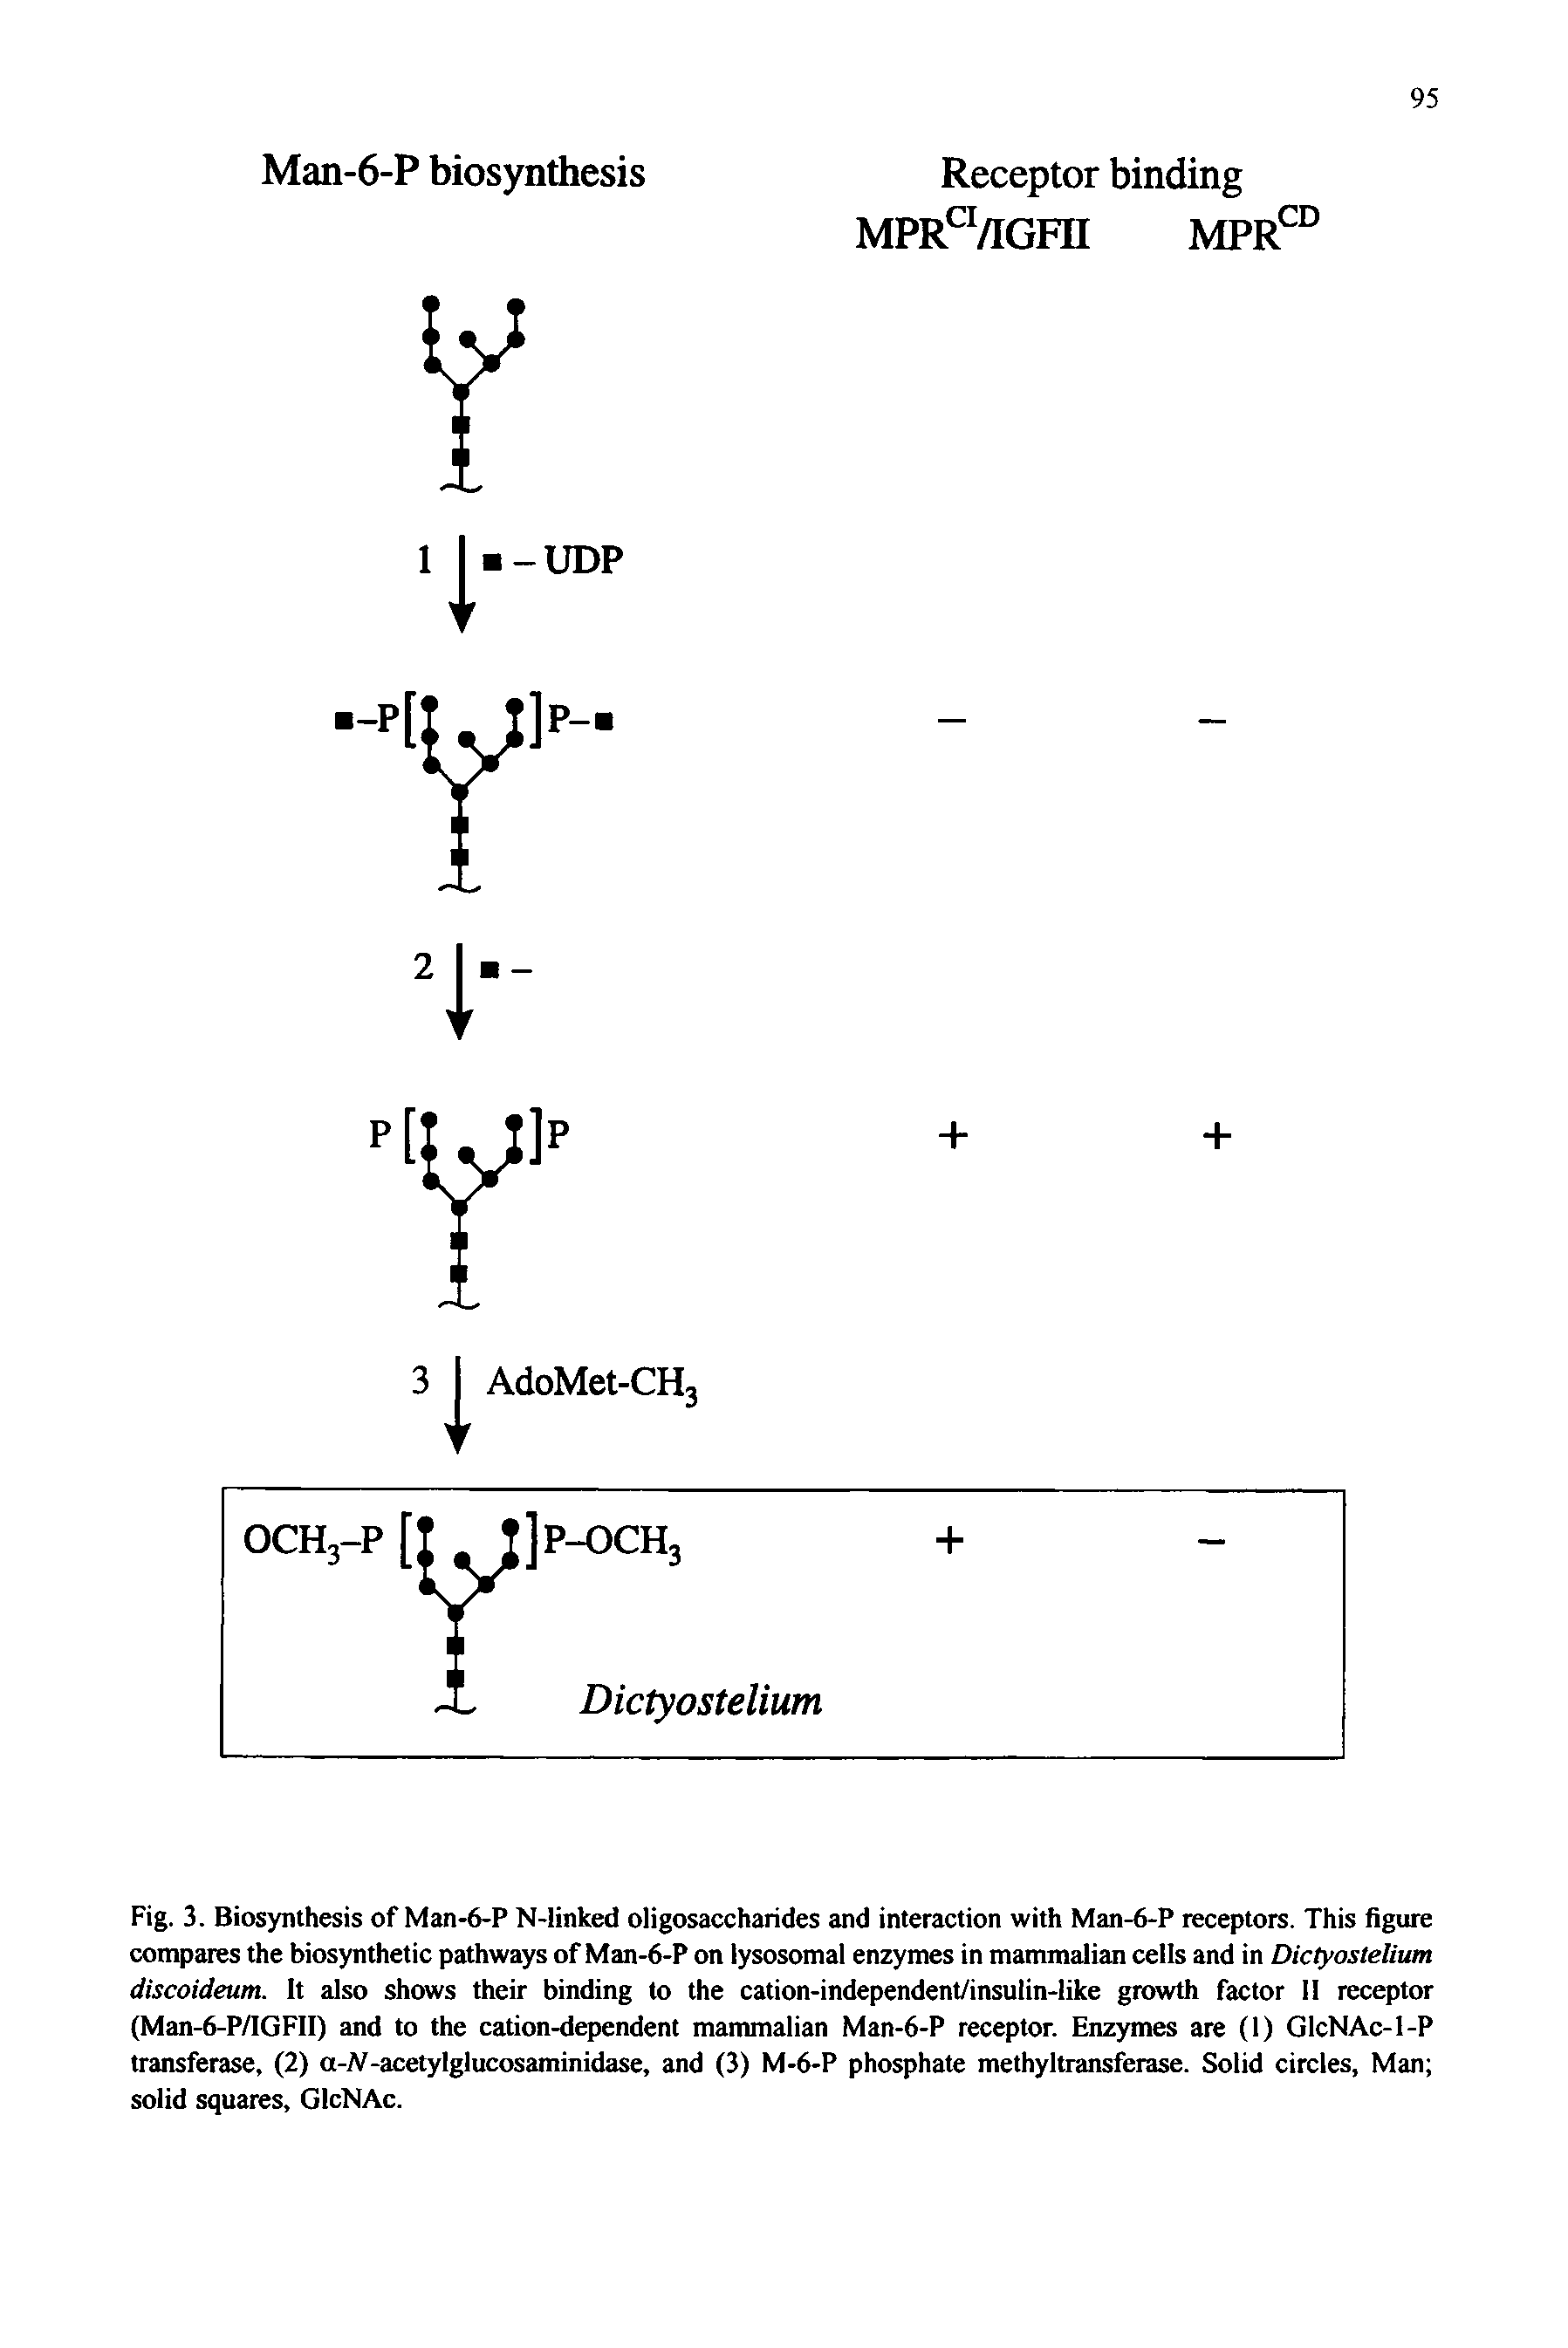 Fig. 3. Biosynthesis of Man-6-P N-linked oligosaccharides and interaction with Man-6-P receptors. This figure compares the biosynthetic pathways of Man-6-P on lysosomal enzymes in mammalian cells and in Dictyostelium discoideum. It also shows their binding to the cation-independent/insulin-like growth factor II receptor (Man-6-P/IGFII) and to the cation-dependent mammalian Man-6-P receptor. Enzymes are (1) GlcNAc-1-P transferase, (2) a-A-acetylglucosaminidase, and (3) M-6-P phosphate methyltransferase. Solid circles, Man solid squares, GlcNAc.